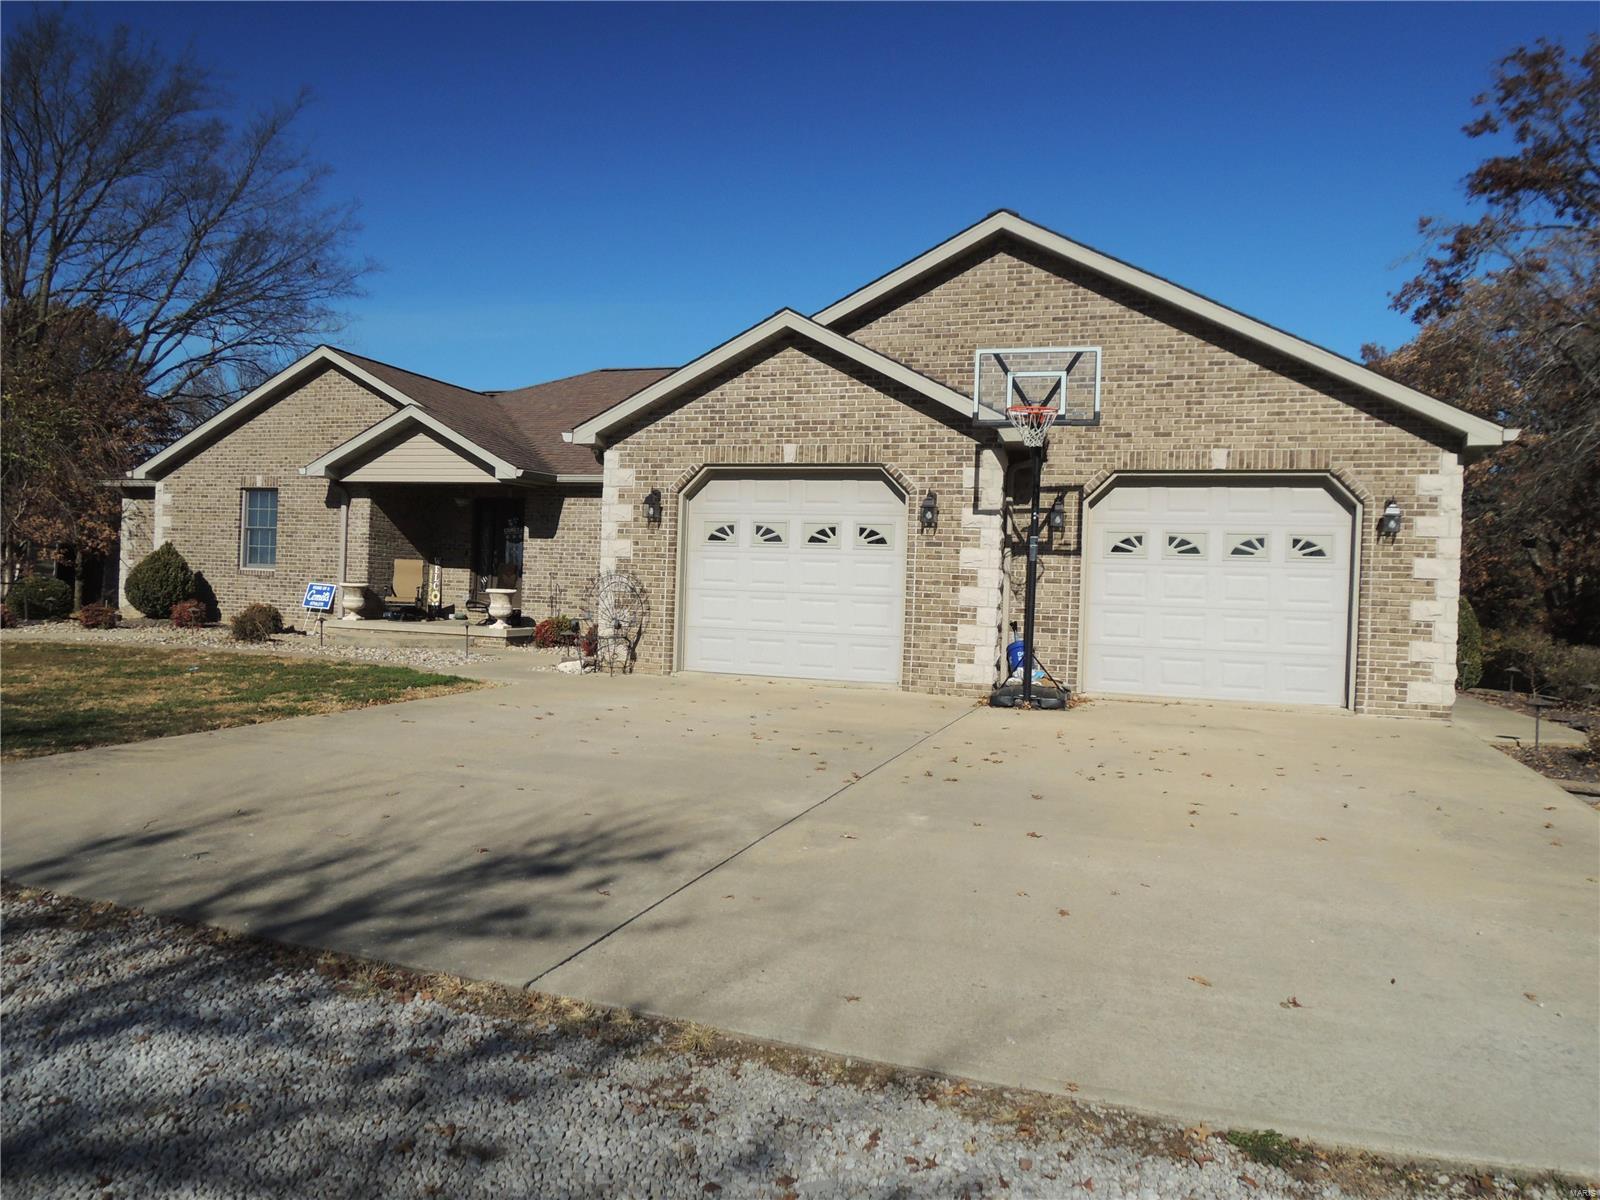 5 Bedroom, 4,960 sq. feet 1151 Campground Trail Greenville, IL